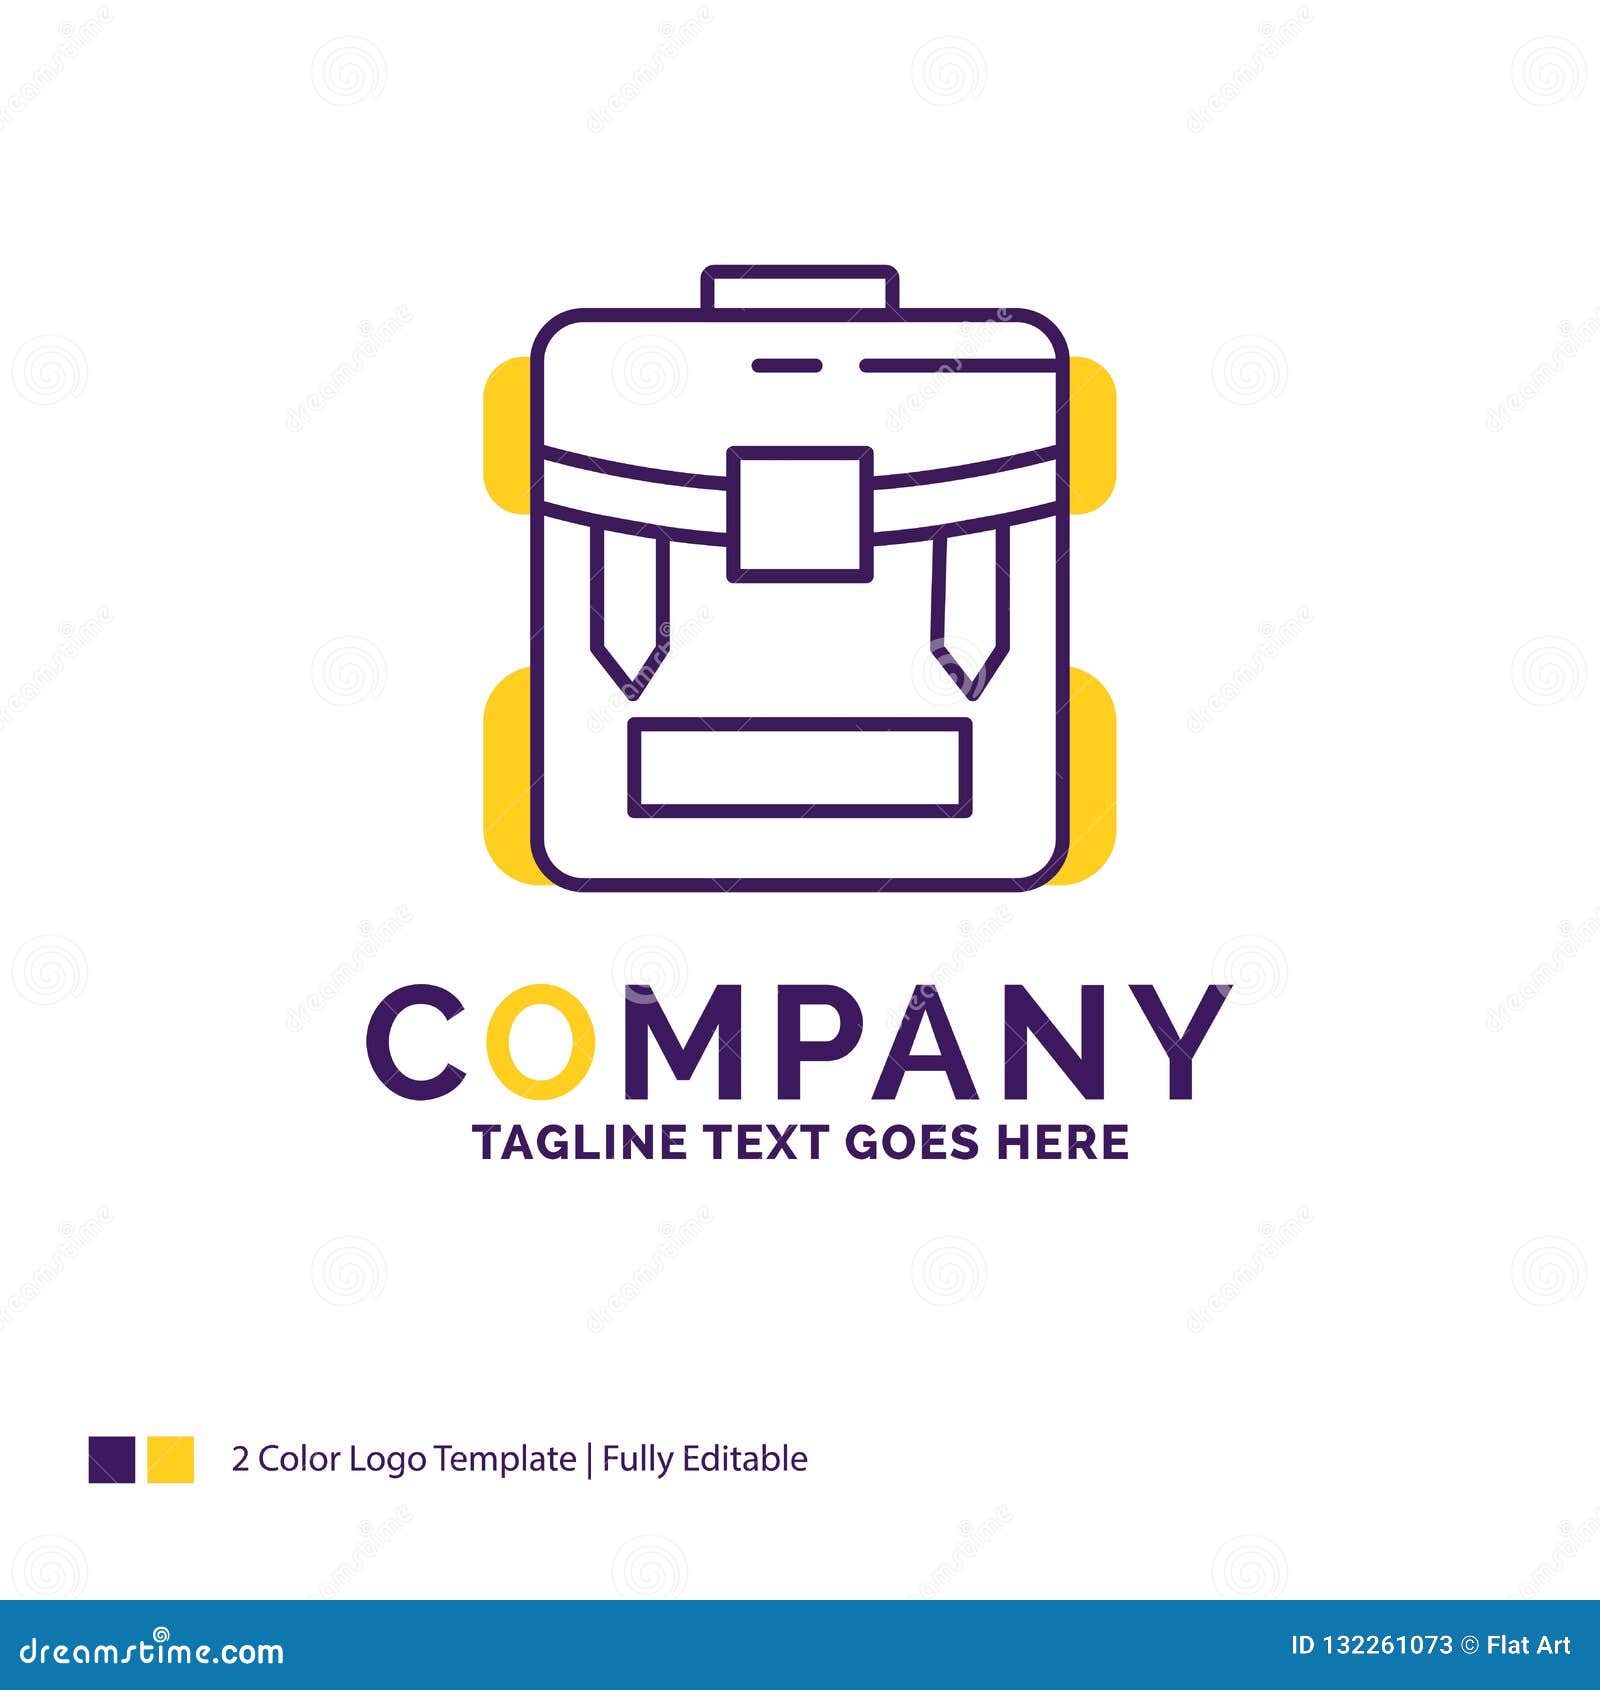 Premium Vector | Bag logo for business company. simple bag logotype idea  design. corporate identity concept. creative bag icon from accessories  collection.